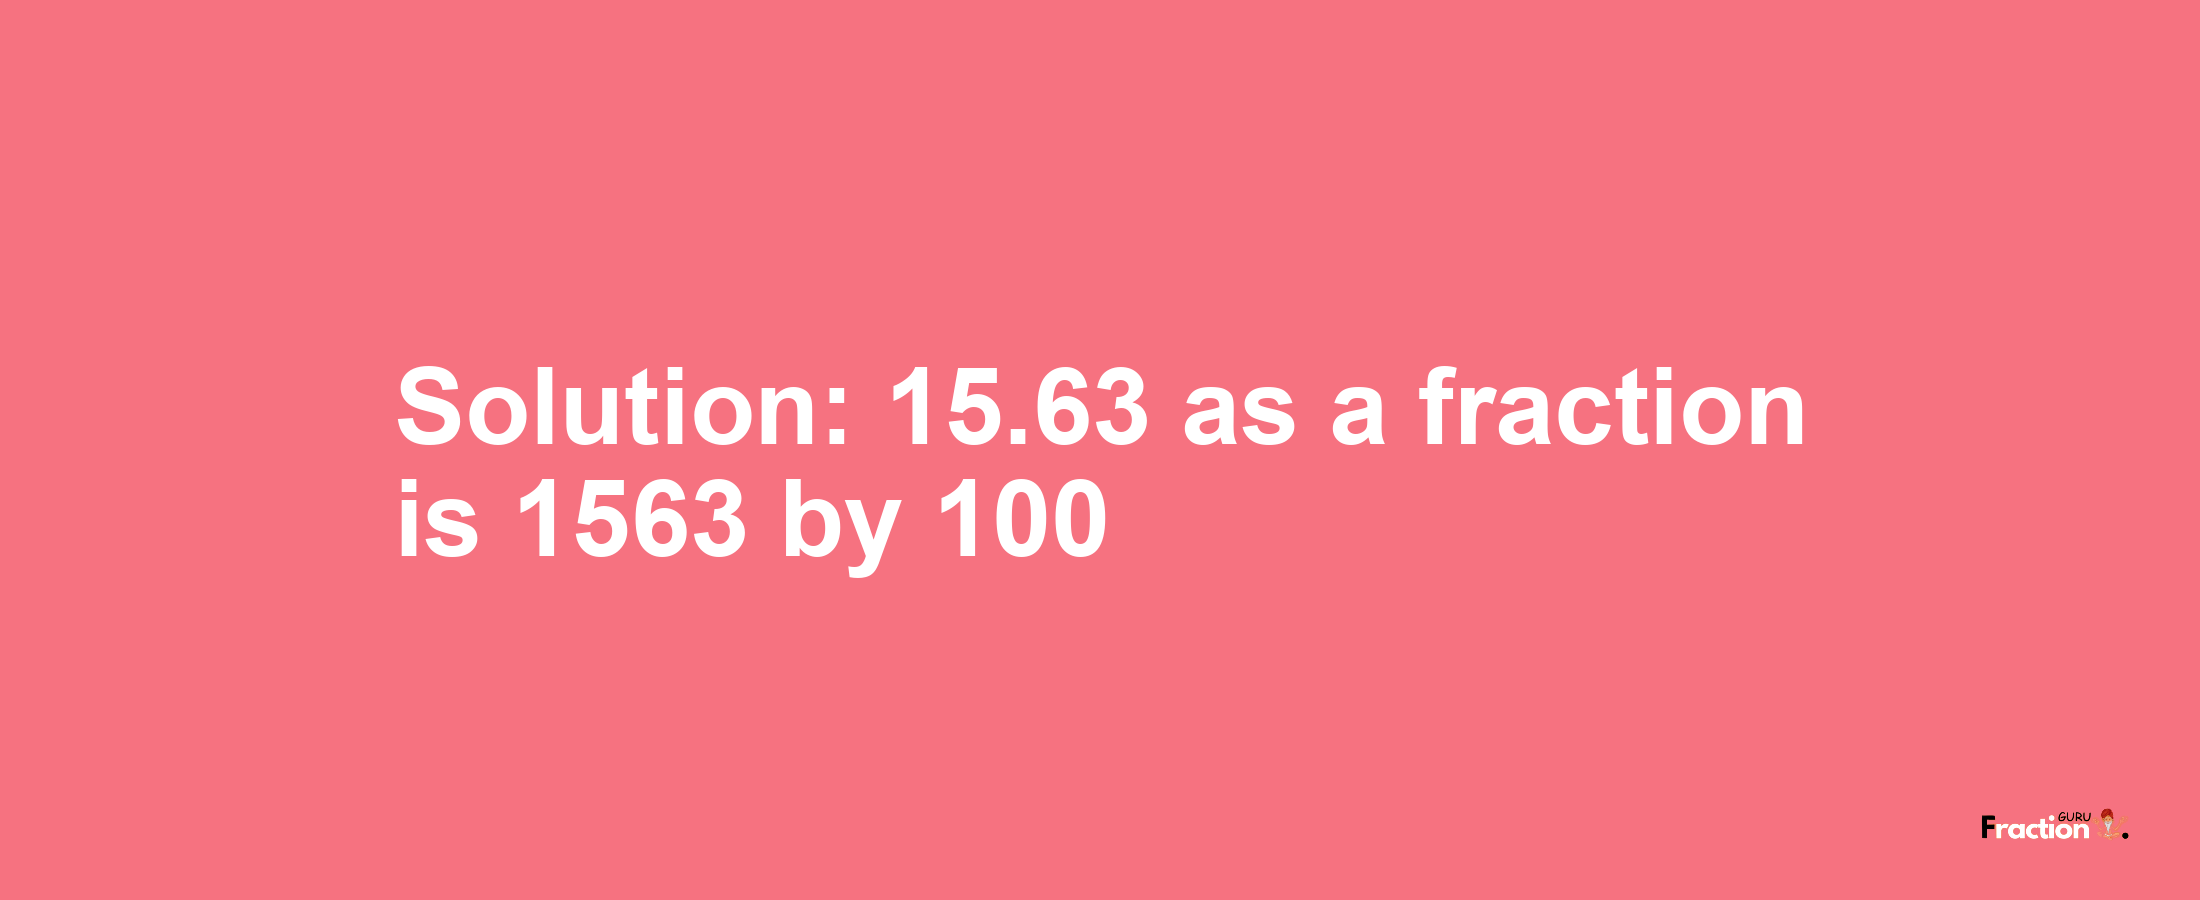 Solution:15.63 as a fraction is 1563/100